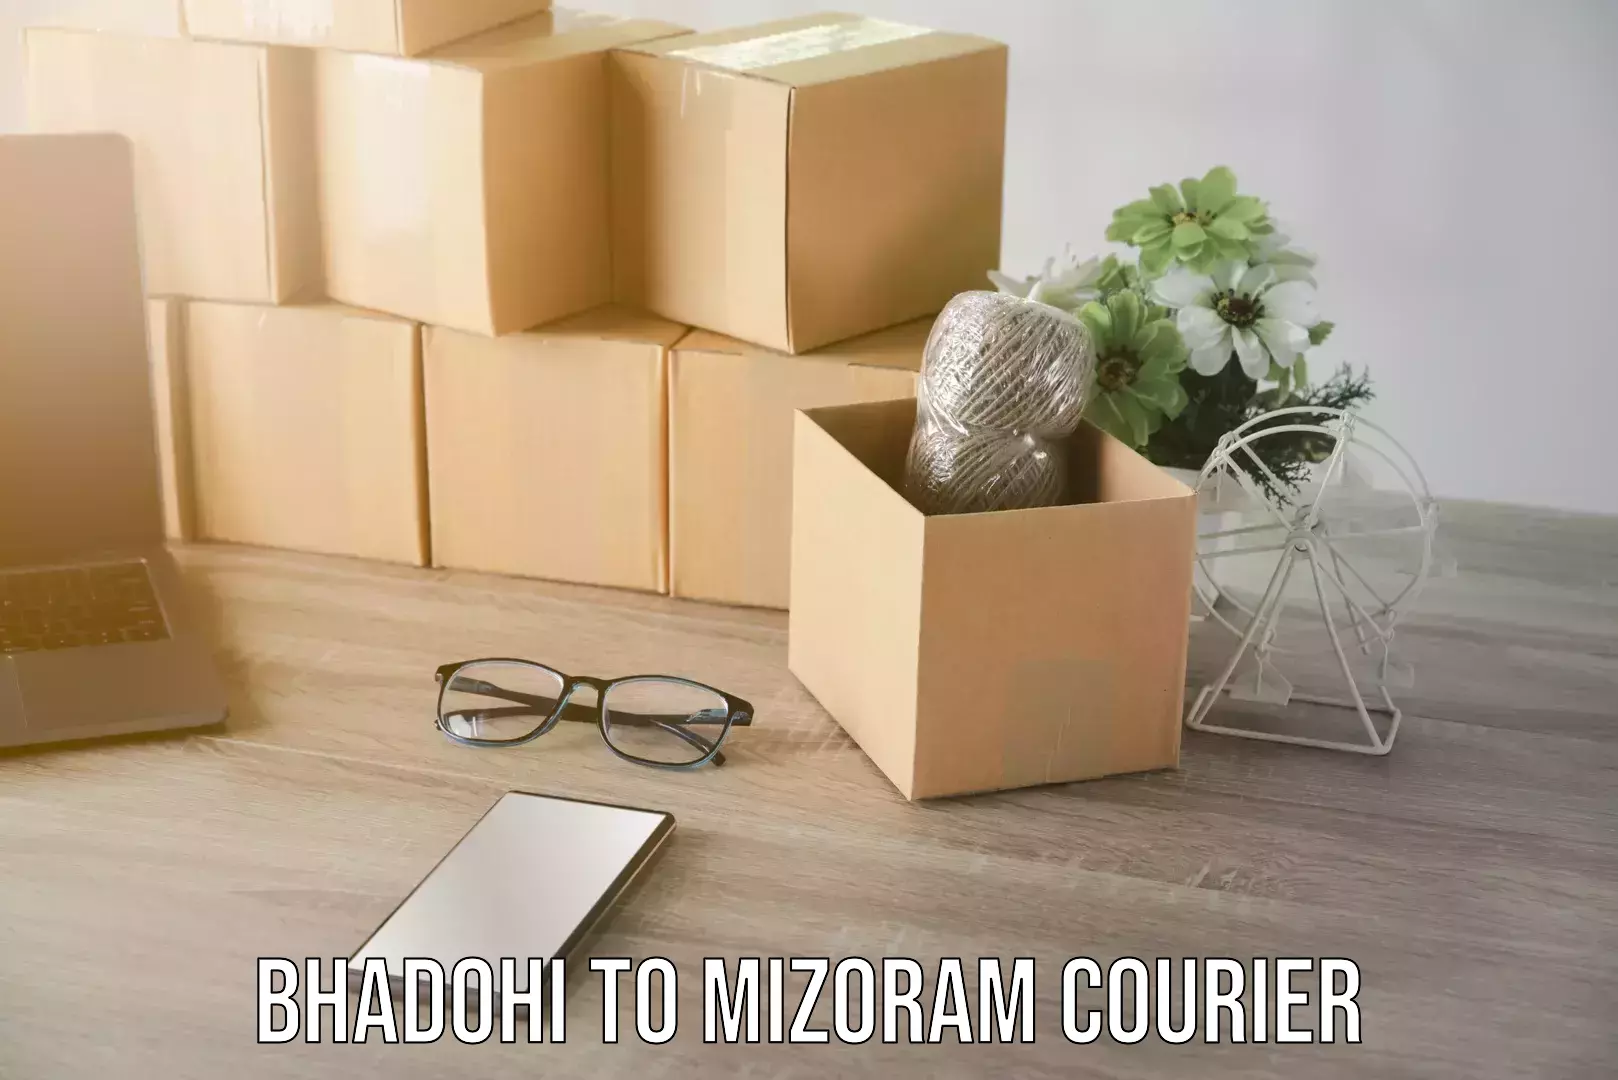 24/7 courier service in Bhadohi to Mizoram